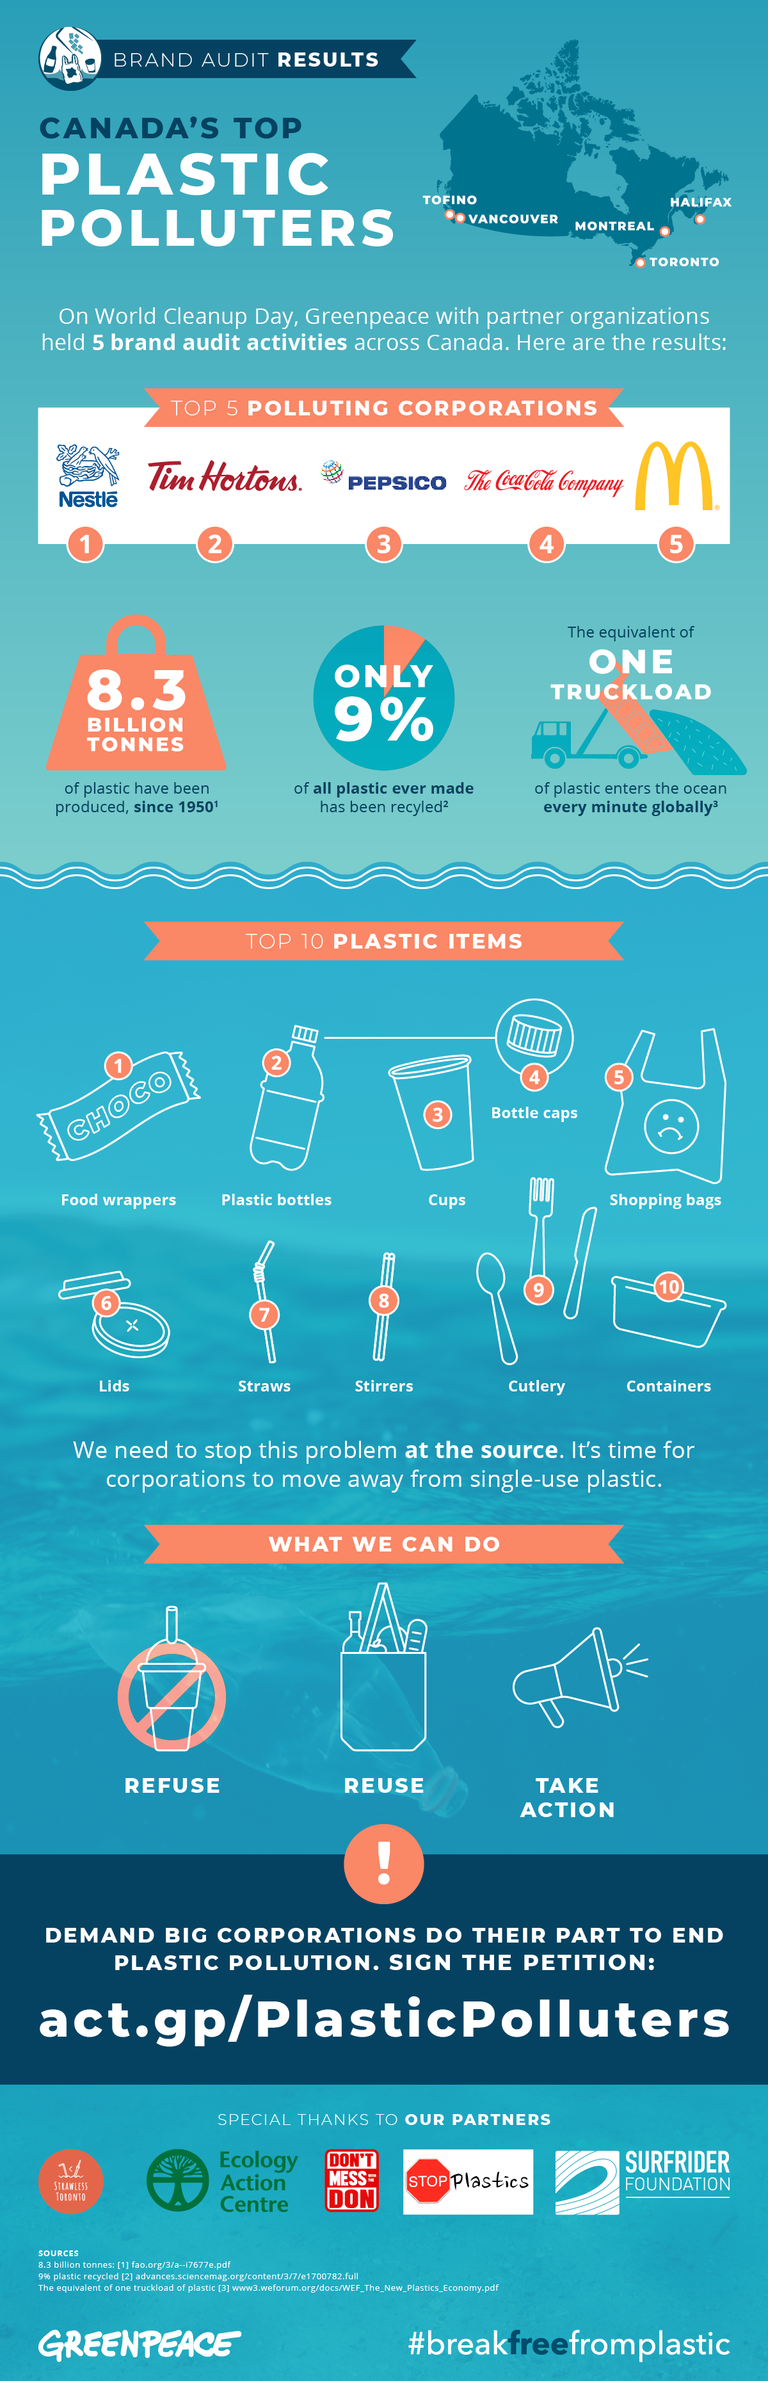 Infographic produced by Greenpeace detailing Canada's top plastic polluters